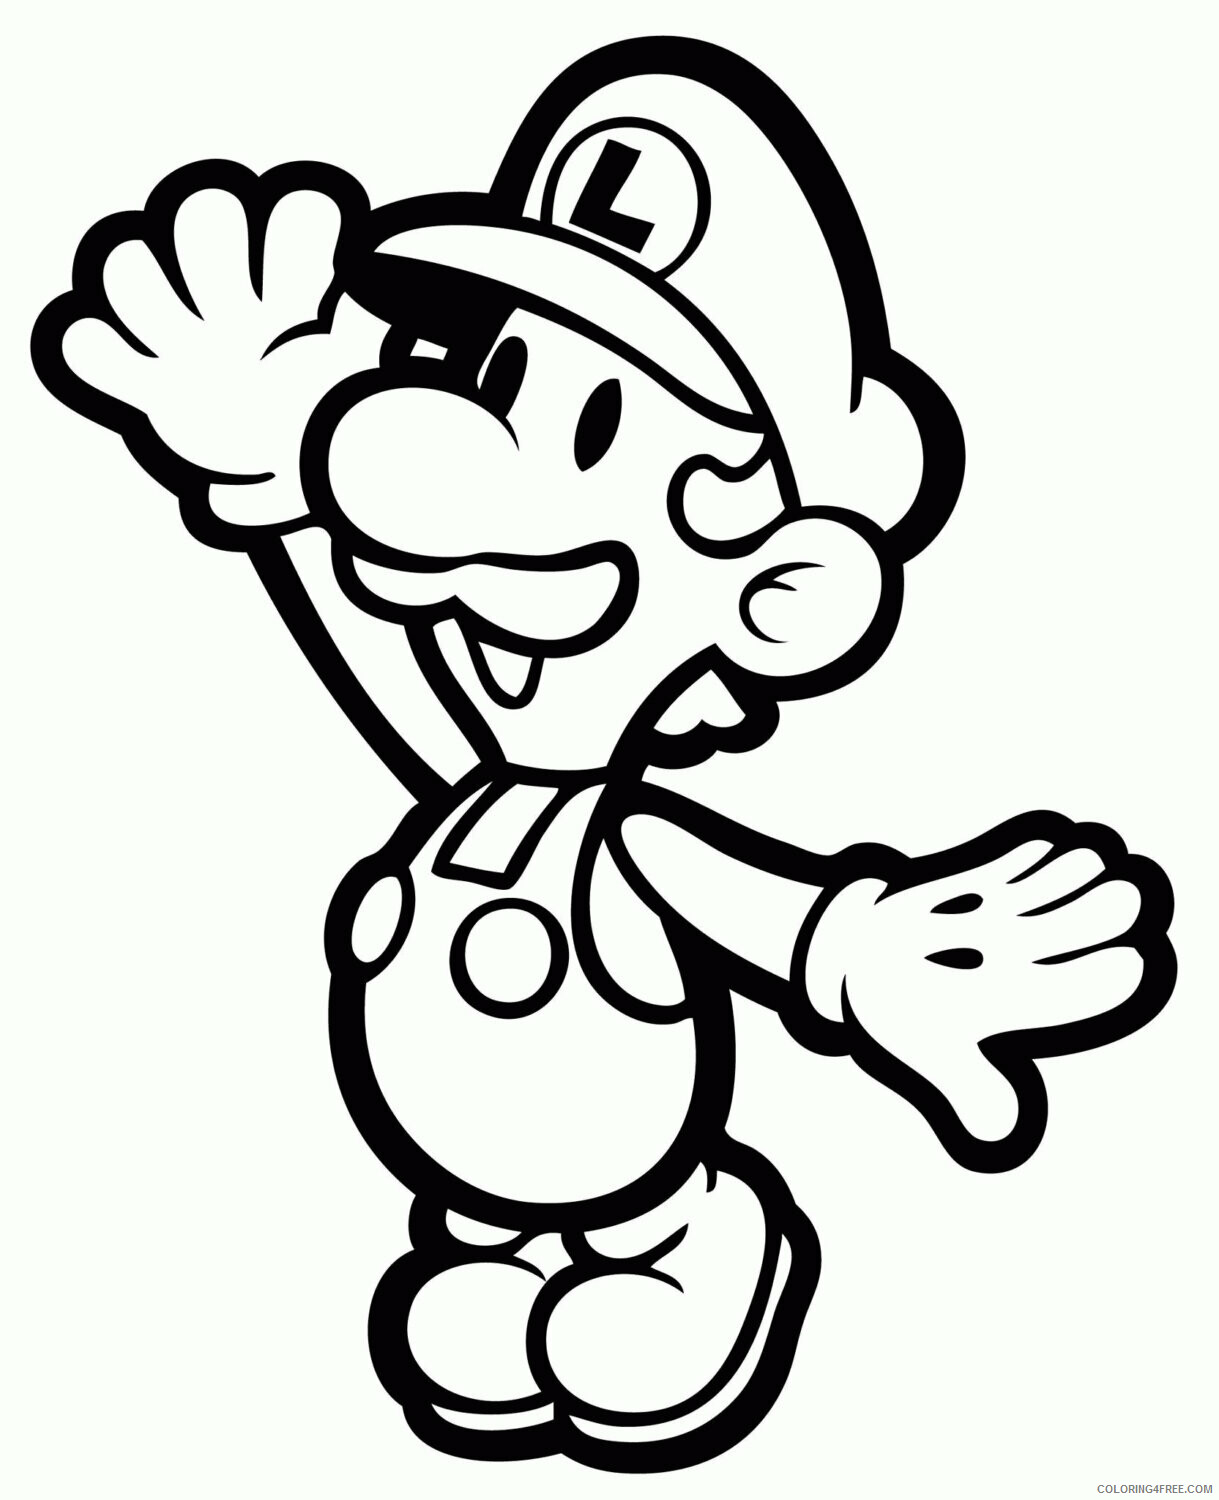 All Mario Character Coloring Pages Printable Sheets Baby Mario Characters Pages 2021 a Coloring4free